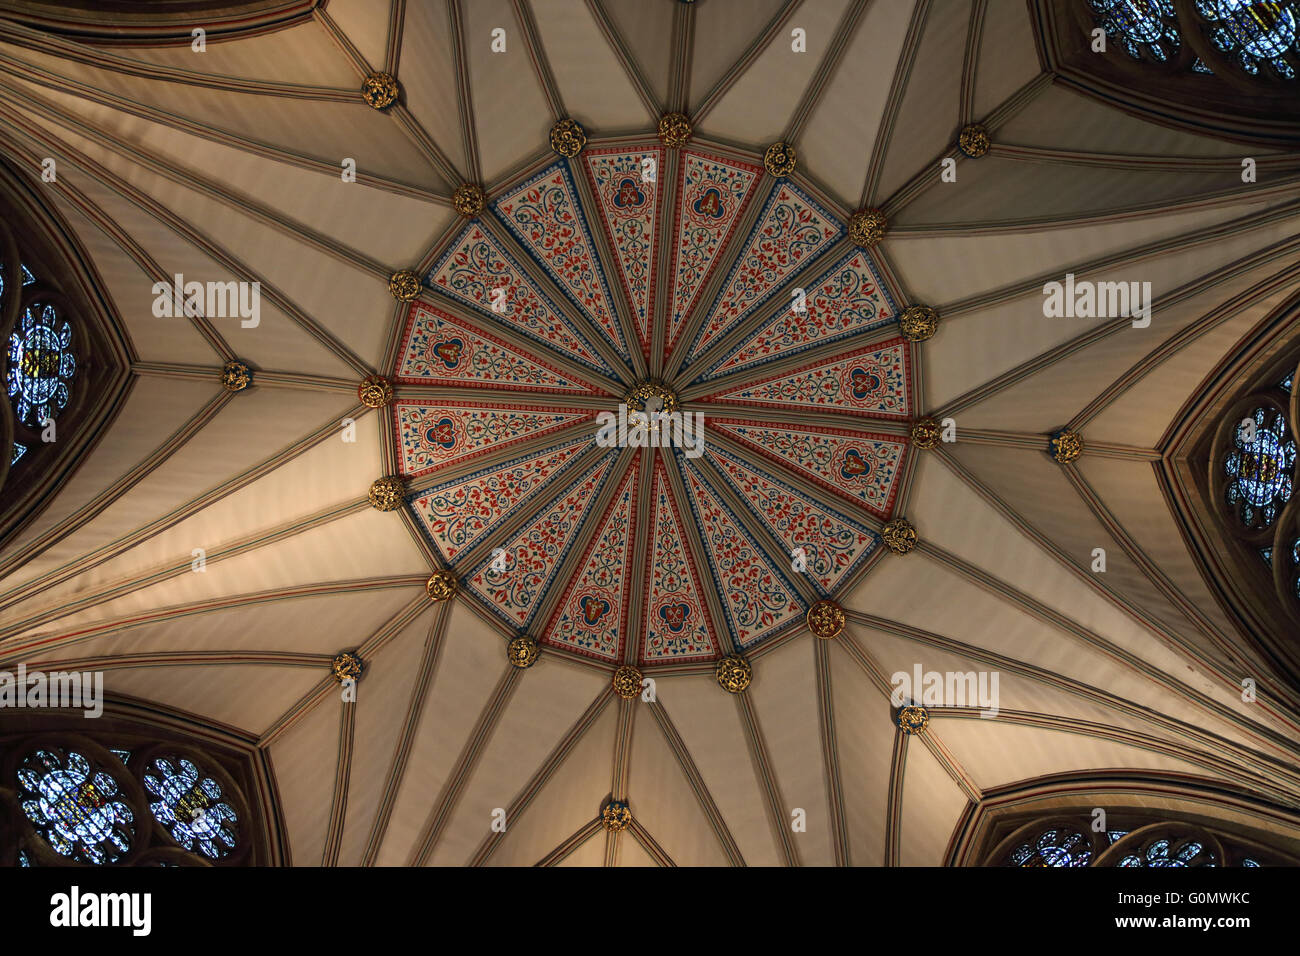 the vaulted ceiling to the chapter house at York minster showing the intricate detail and craftsmanship Stock Photo